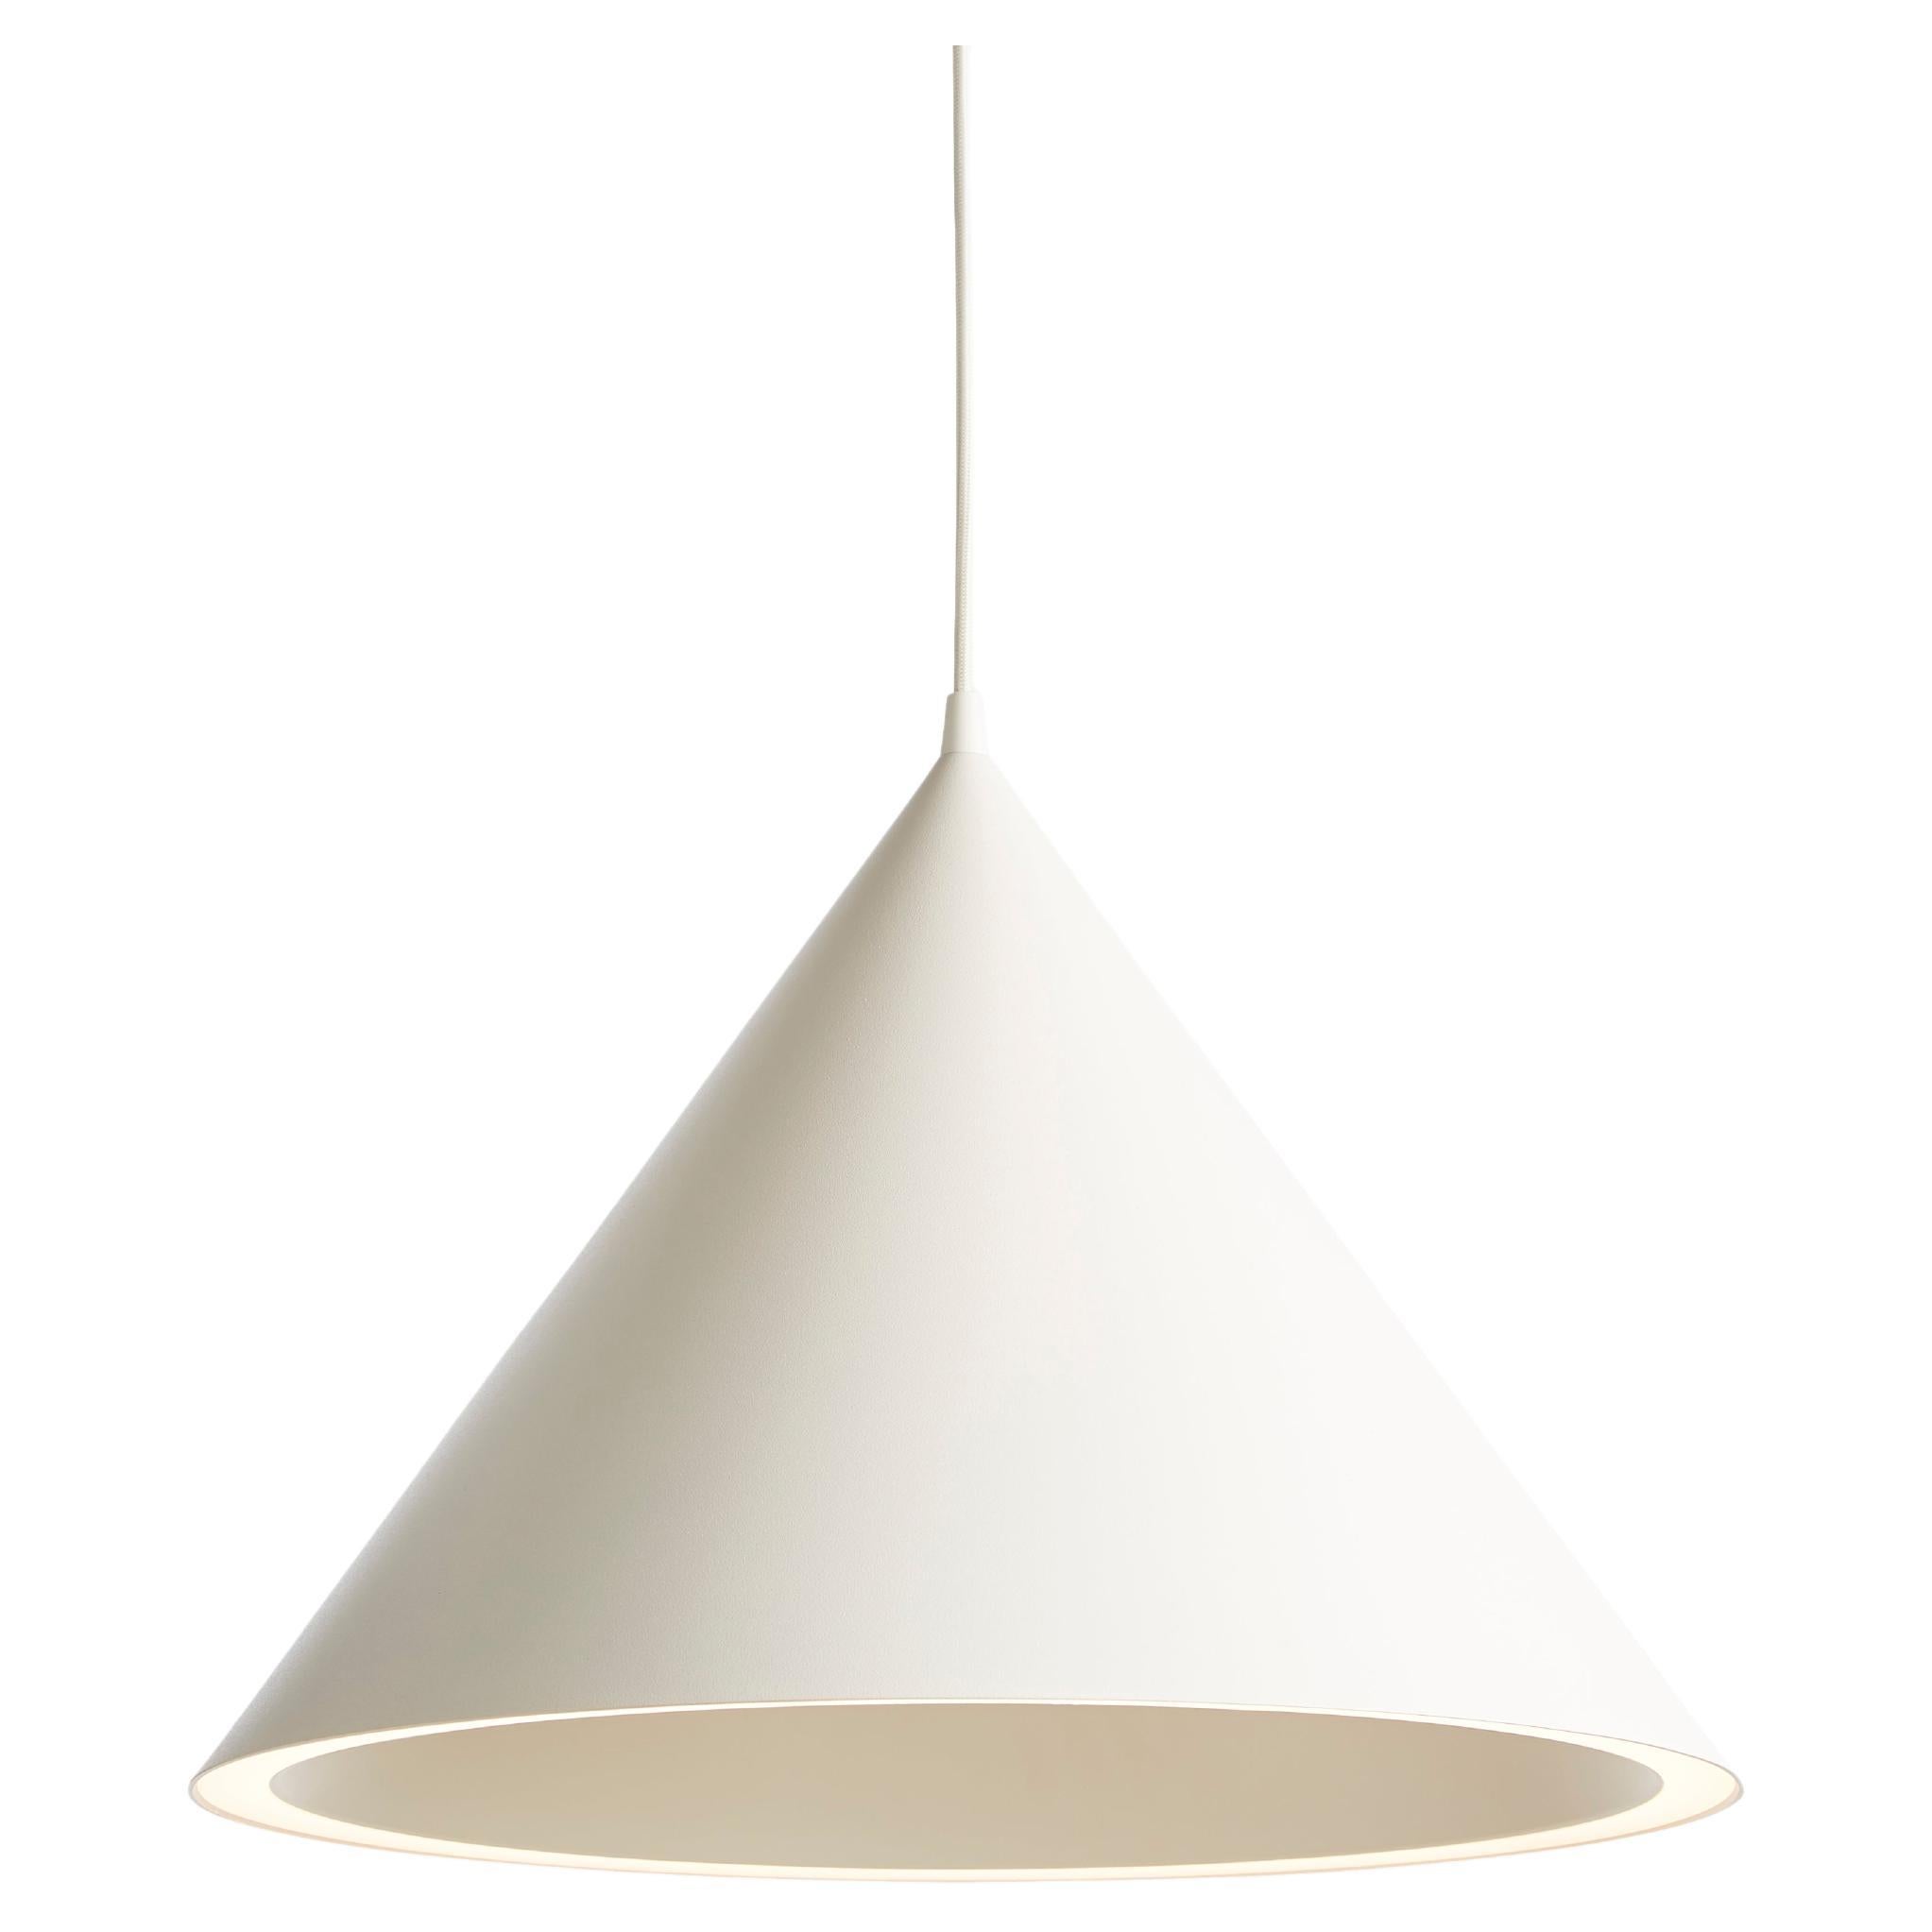 Large White Annular Pendant Lamp by MSDS Studio